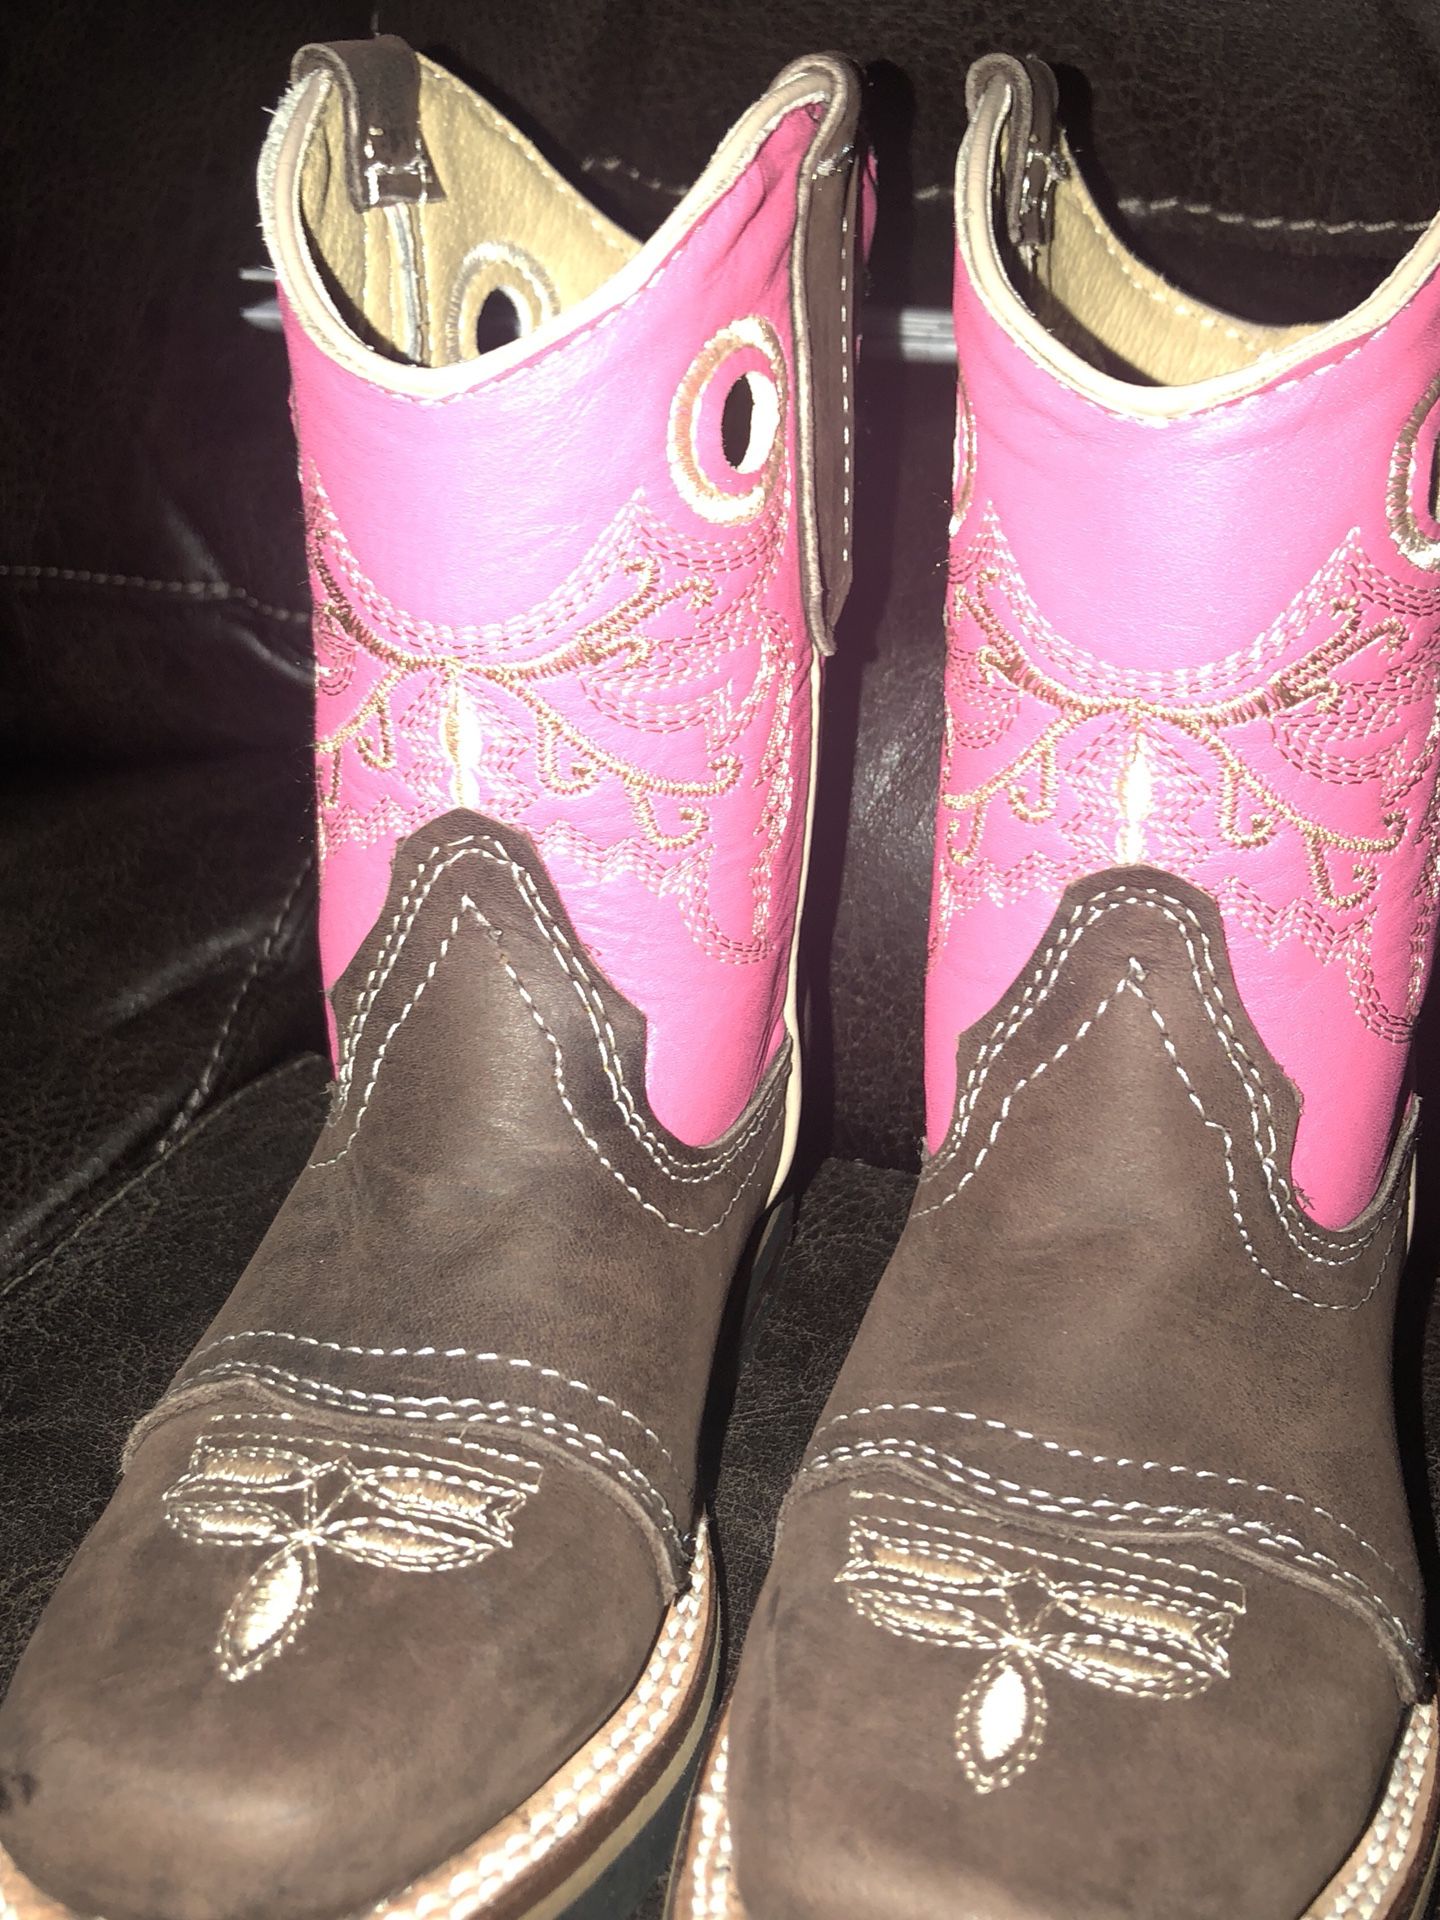 New Girls Rodeo Boots Size 12.